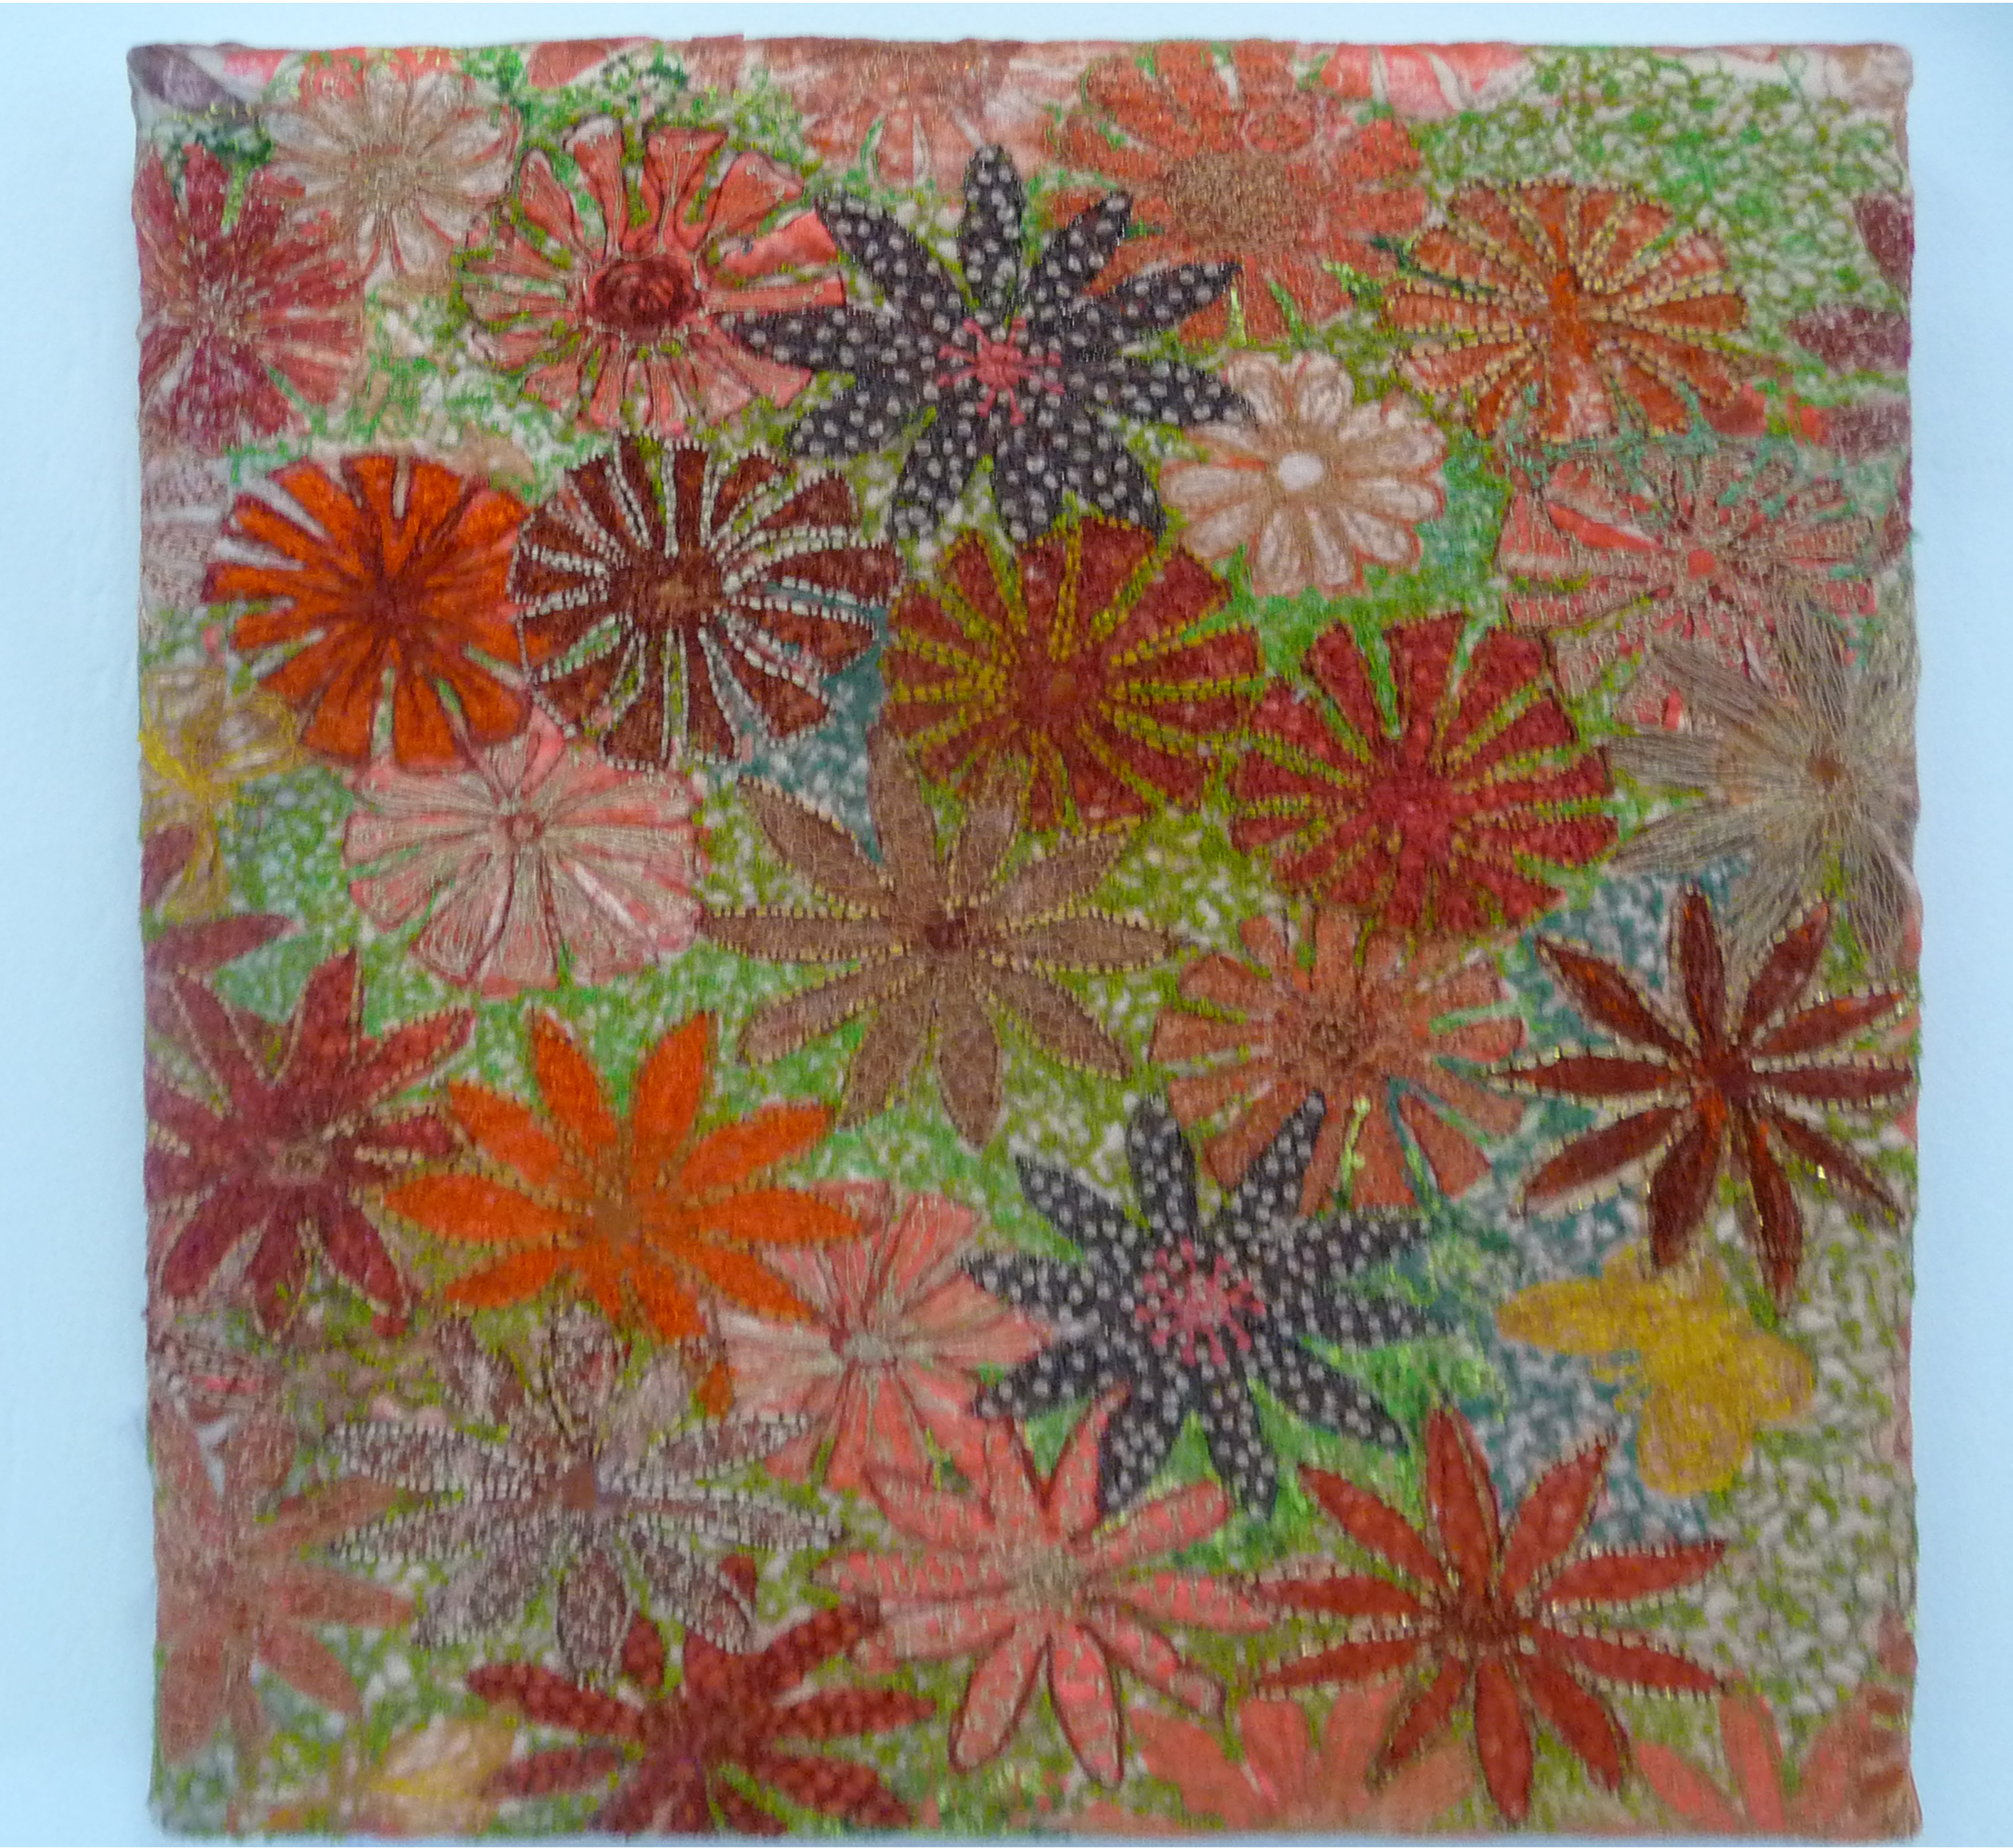 FLORAL FEAST by Tracey Ramsey, hand printed and stitched hanging